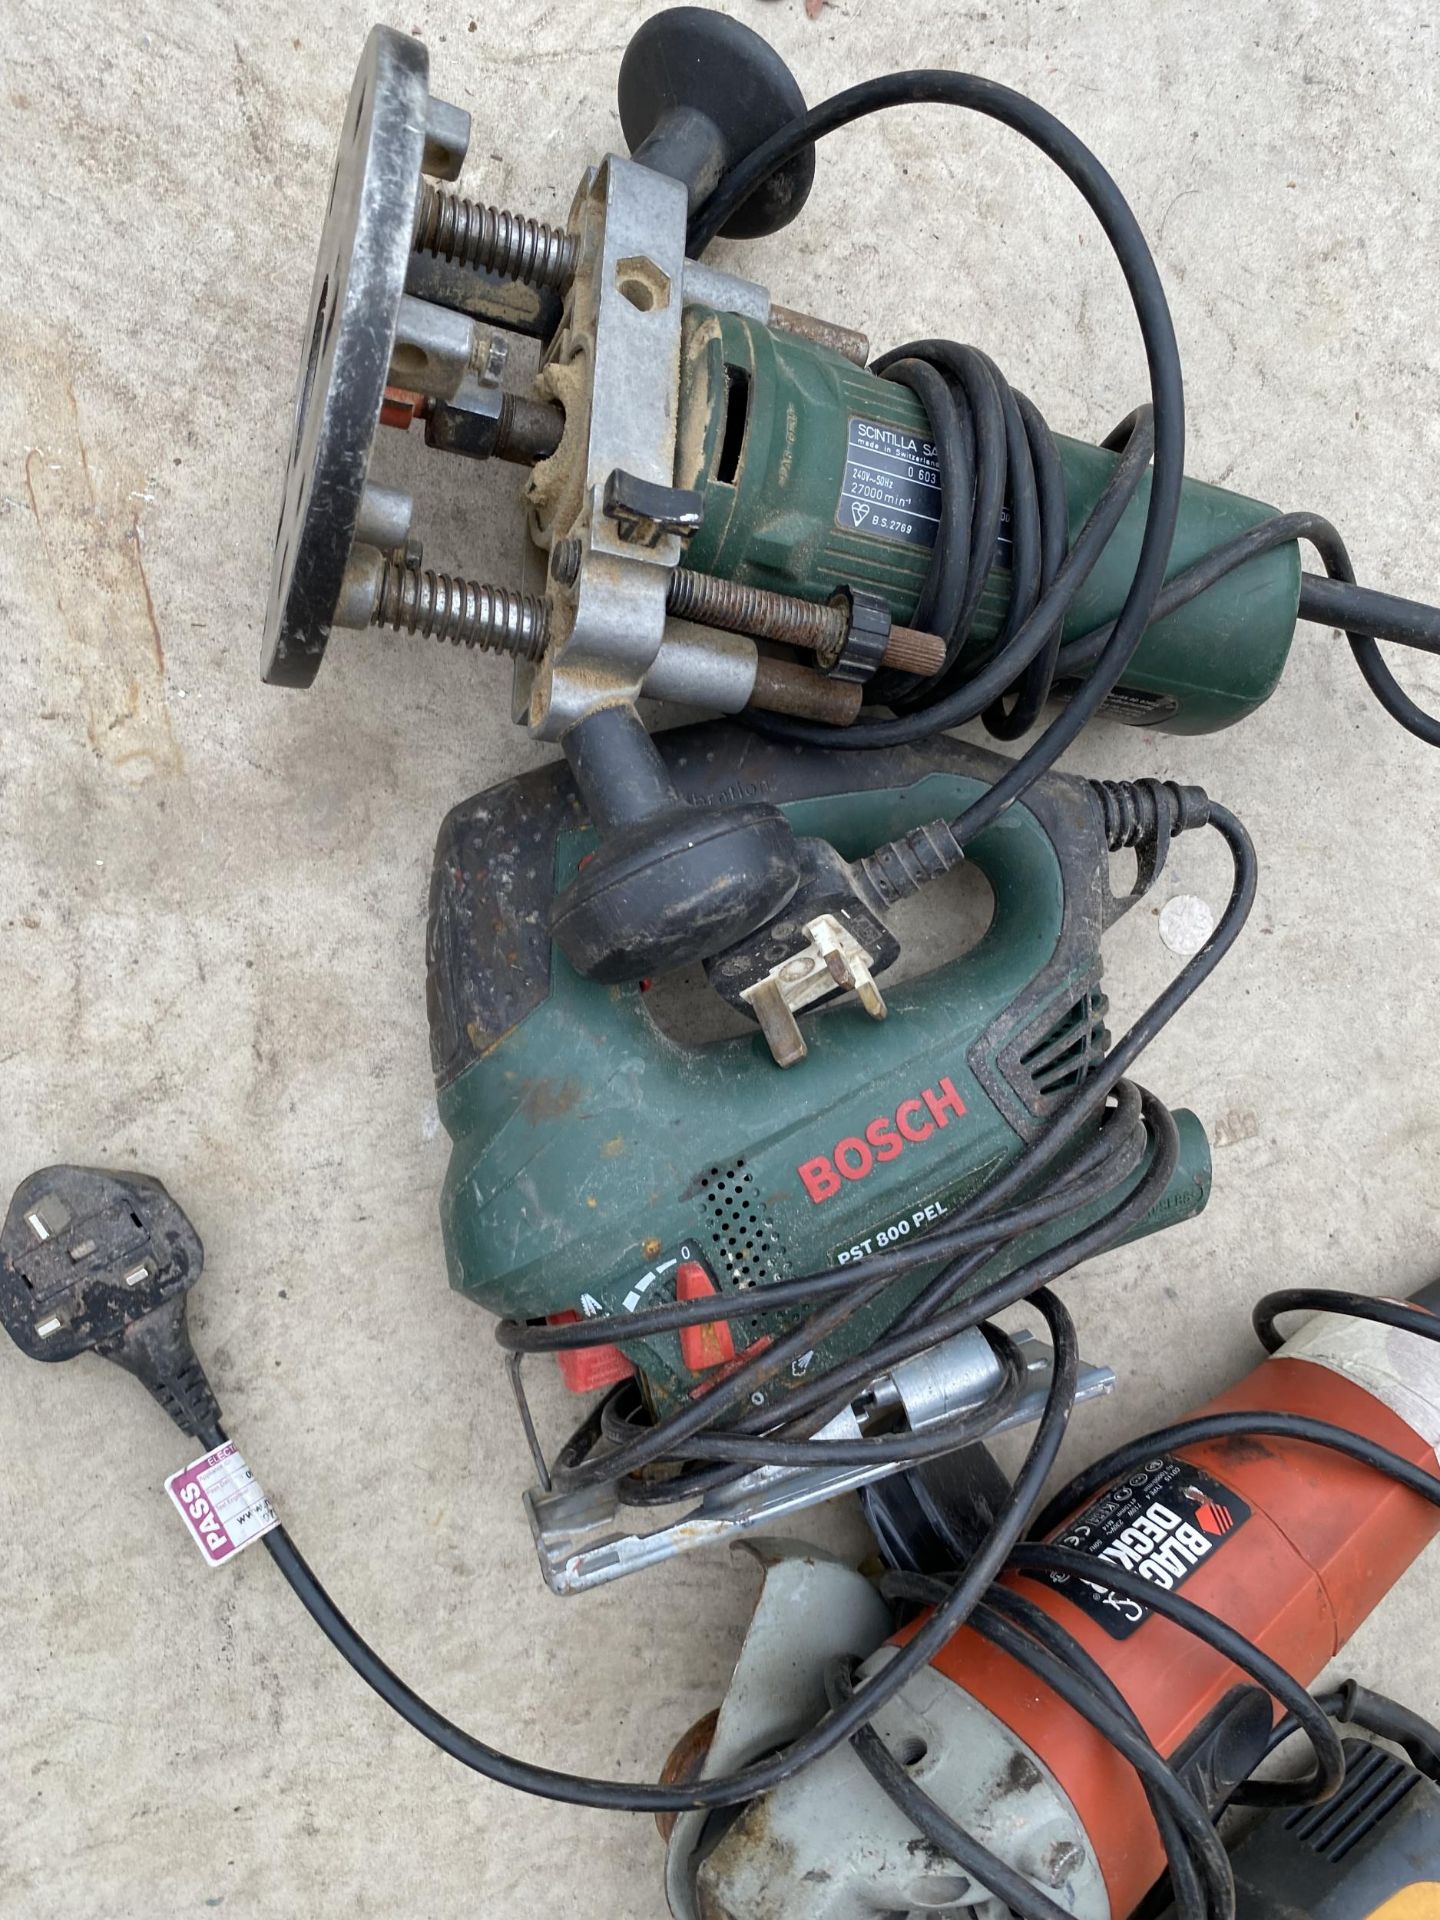 FIVE POWER TOOLS TO INCLUDE TWO GRINDERS AND A BOSCH JIGSAW ETC - Image 2 of 2